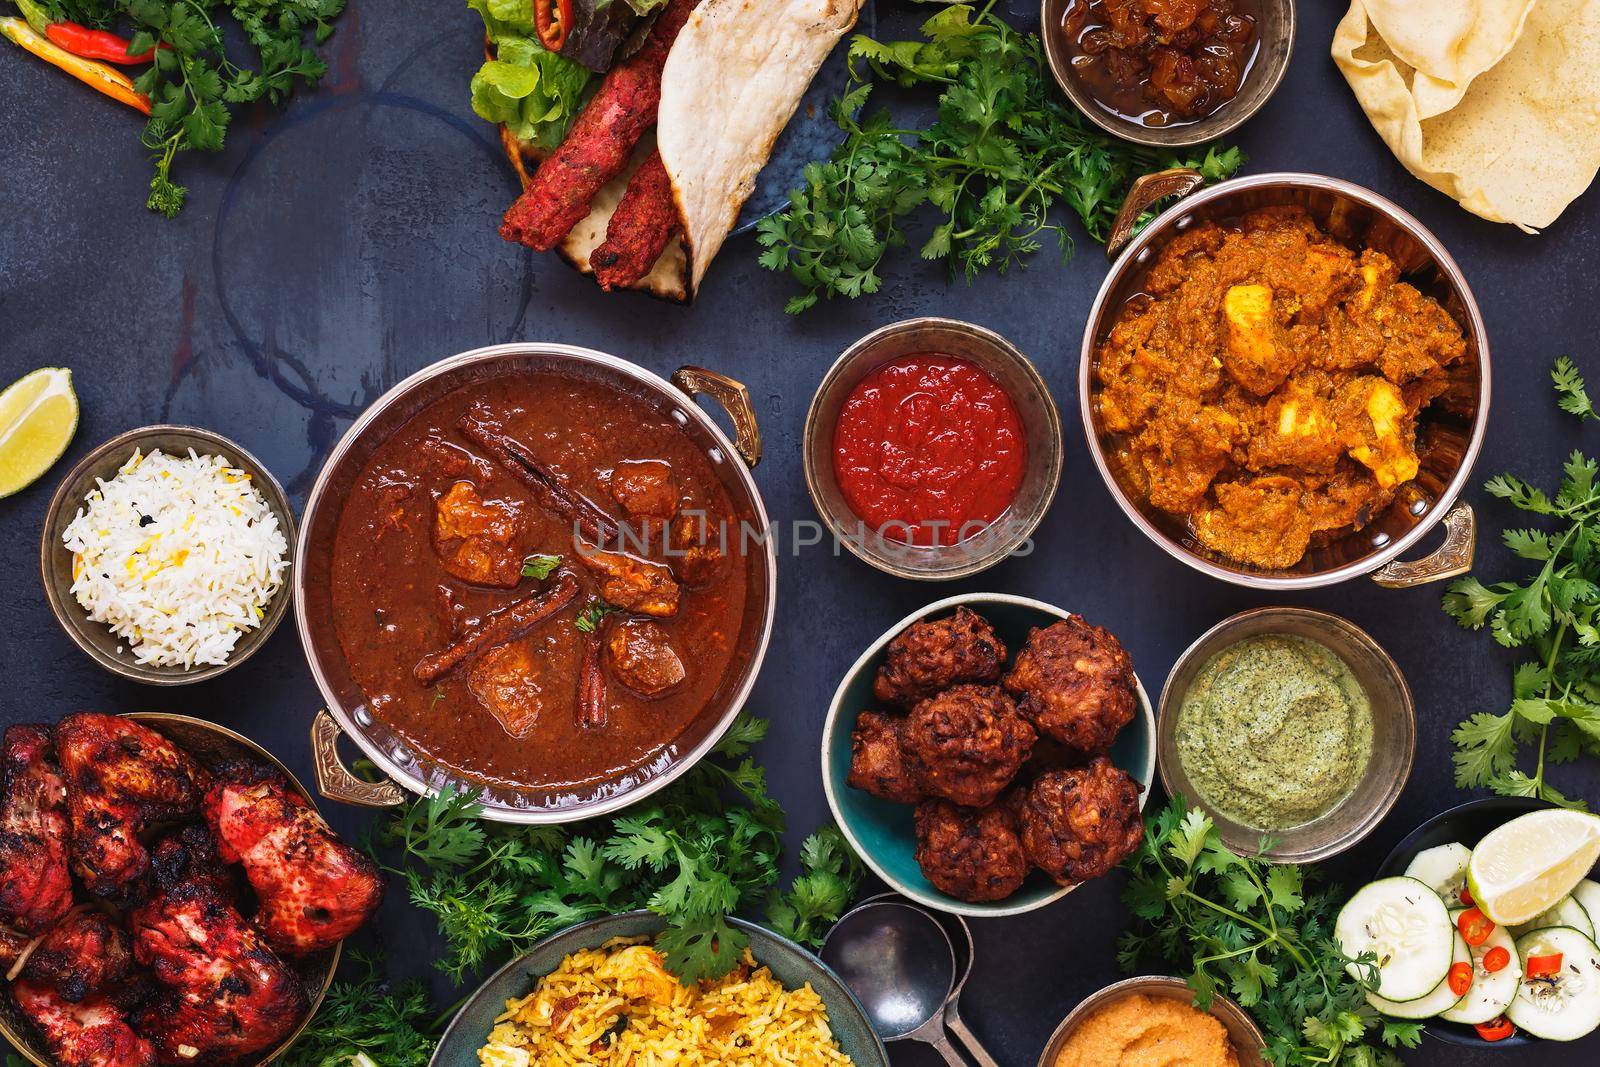 Taste of India. A selection of Indian food with various bowls of food featuring  chicken tikka masala, rogan josh, kebabs, tandoori chicken wings, pasties, poppadoms with dips and naan bread by Slast20